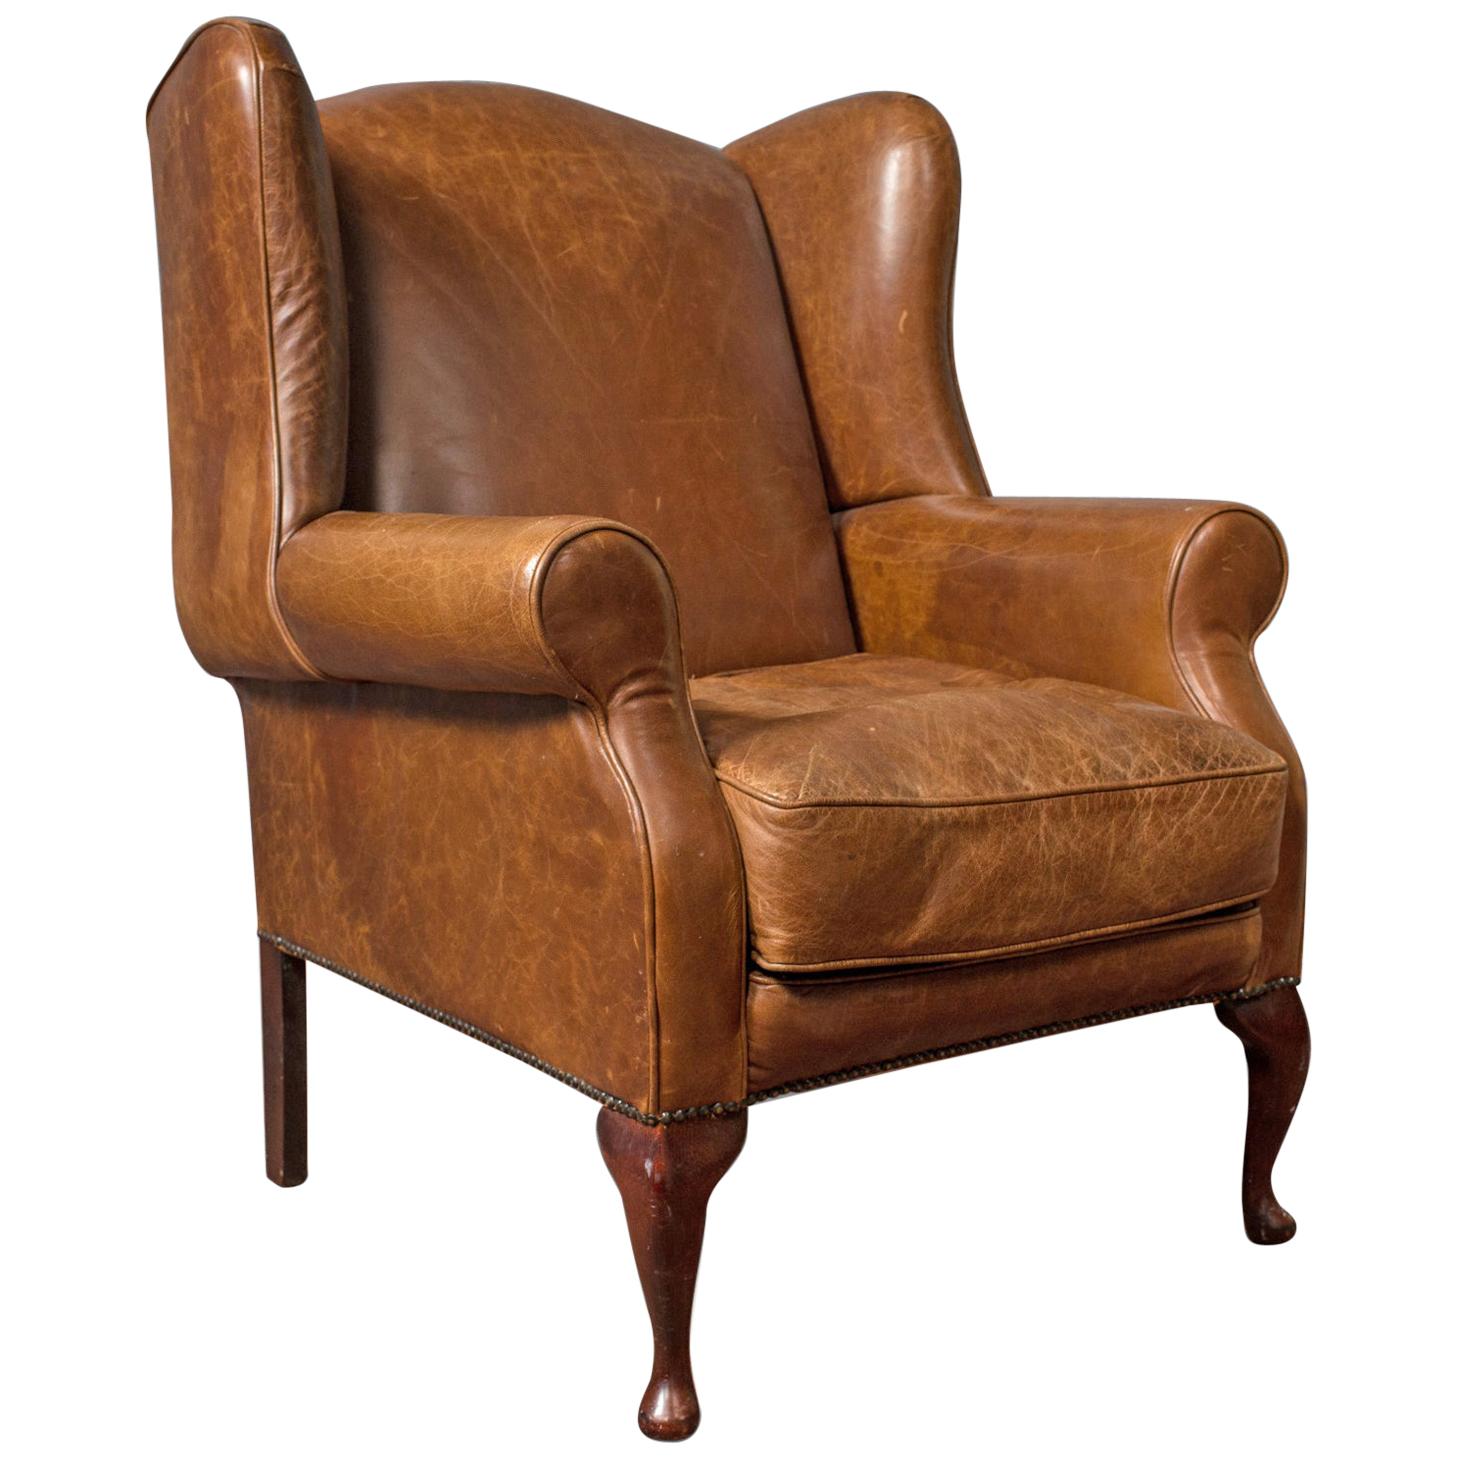 Vintage Leather Armchair, English, Wingback Chair, Late 20th Century